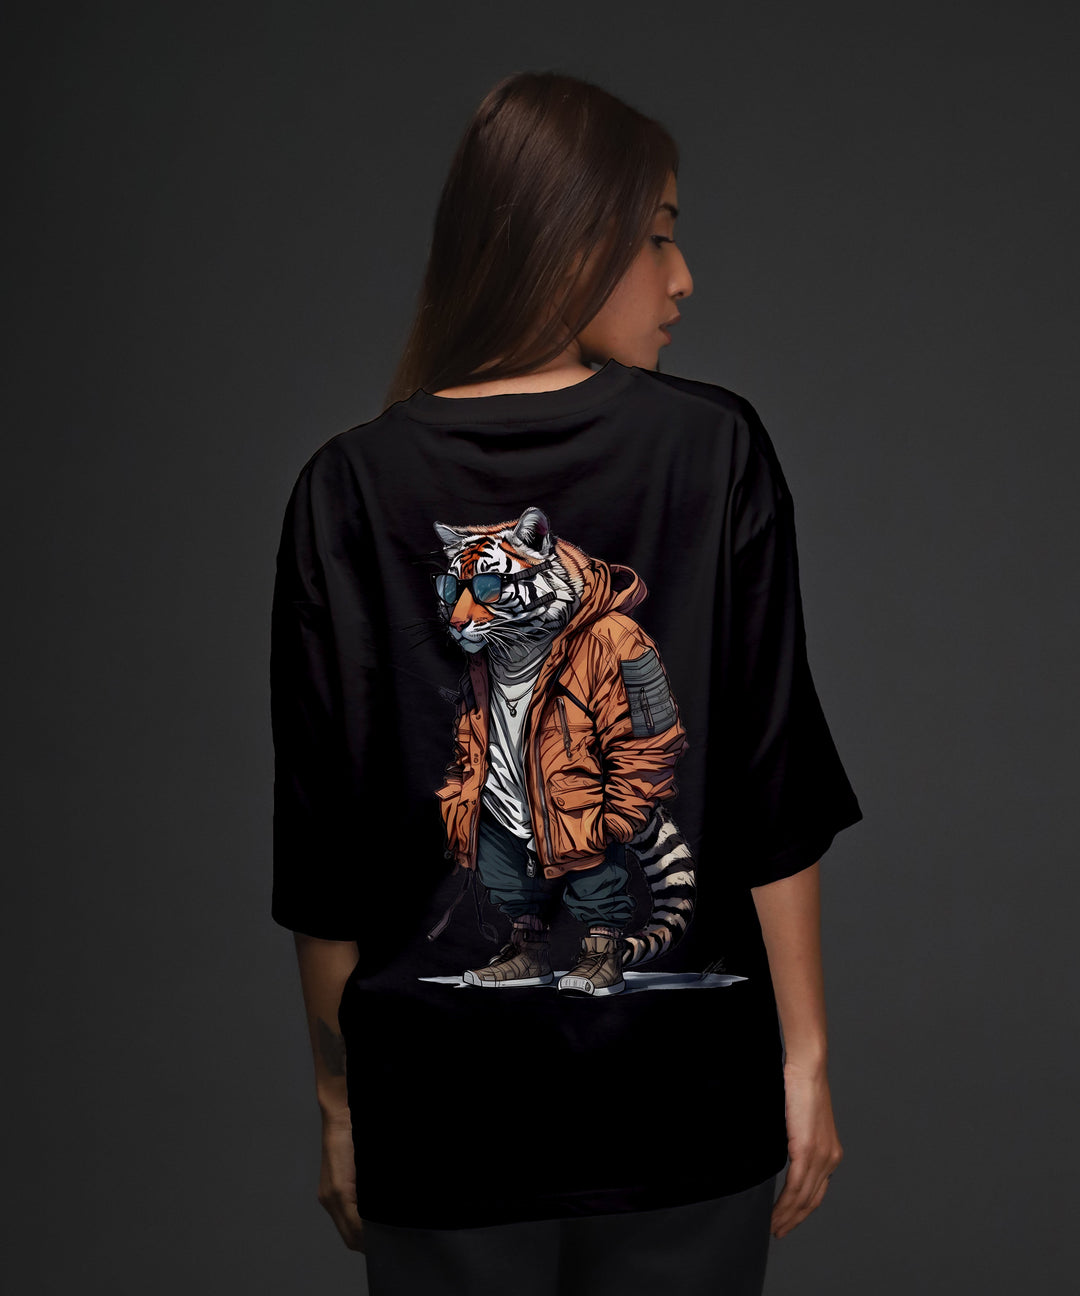 Over Size Tee - LYNX BLACK - WOMEN'S PRINTED OVER SIZE TEE #53